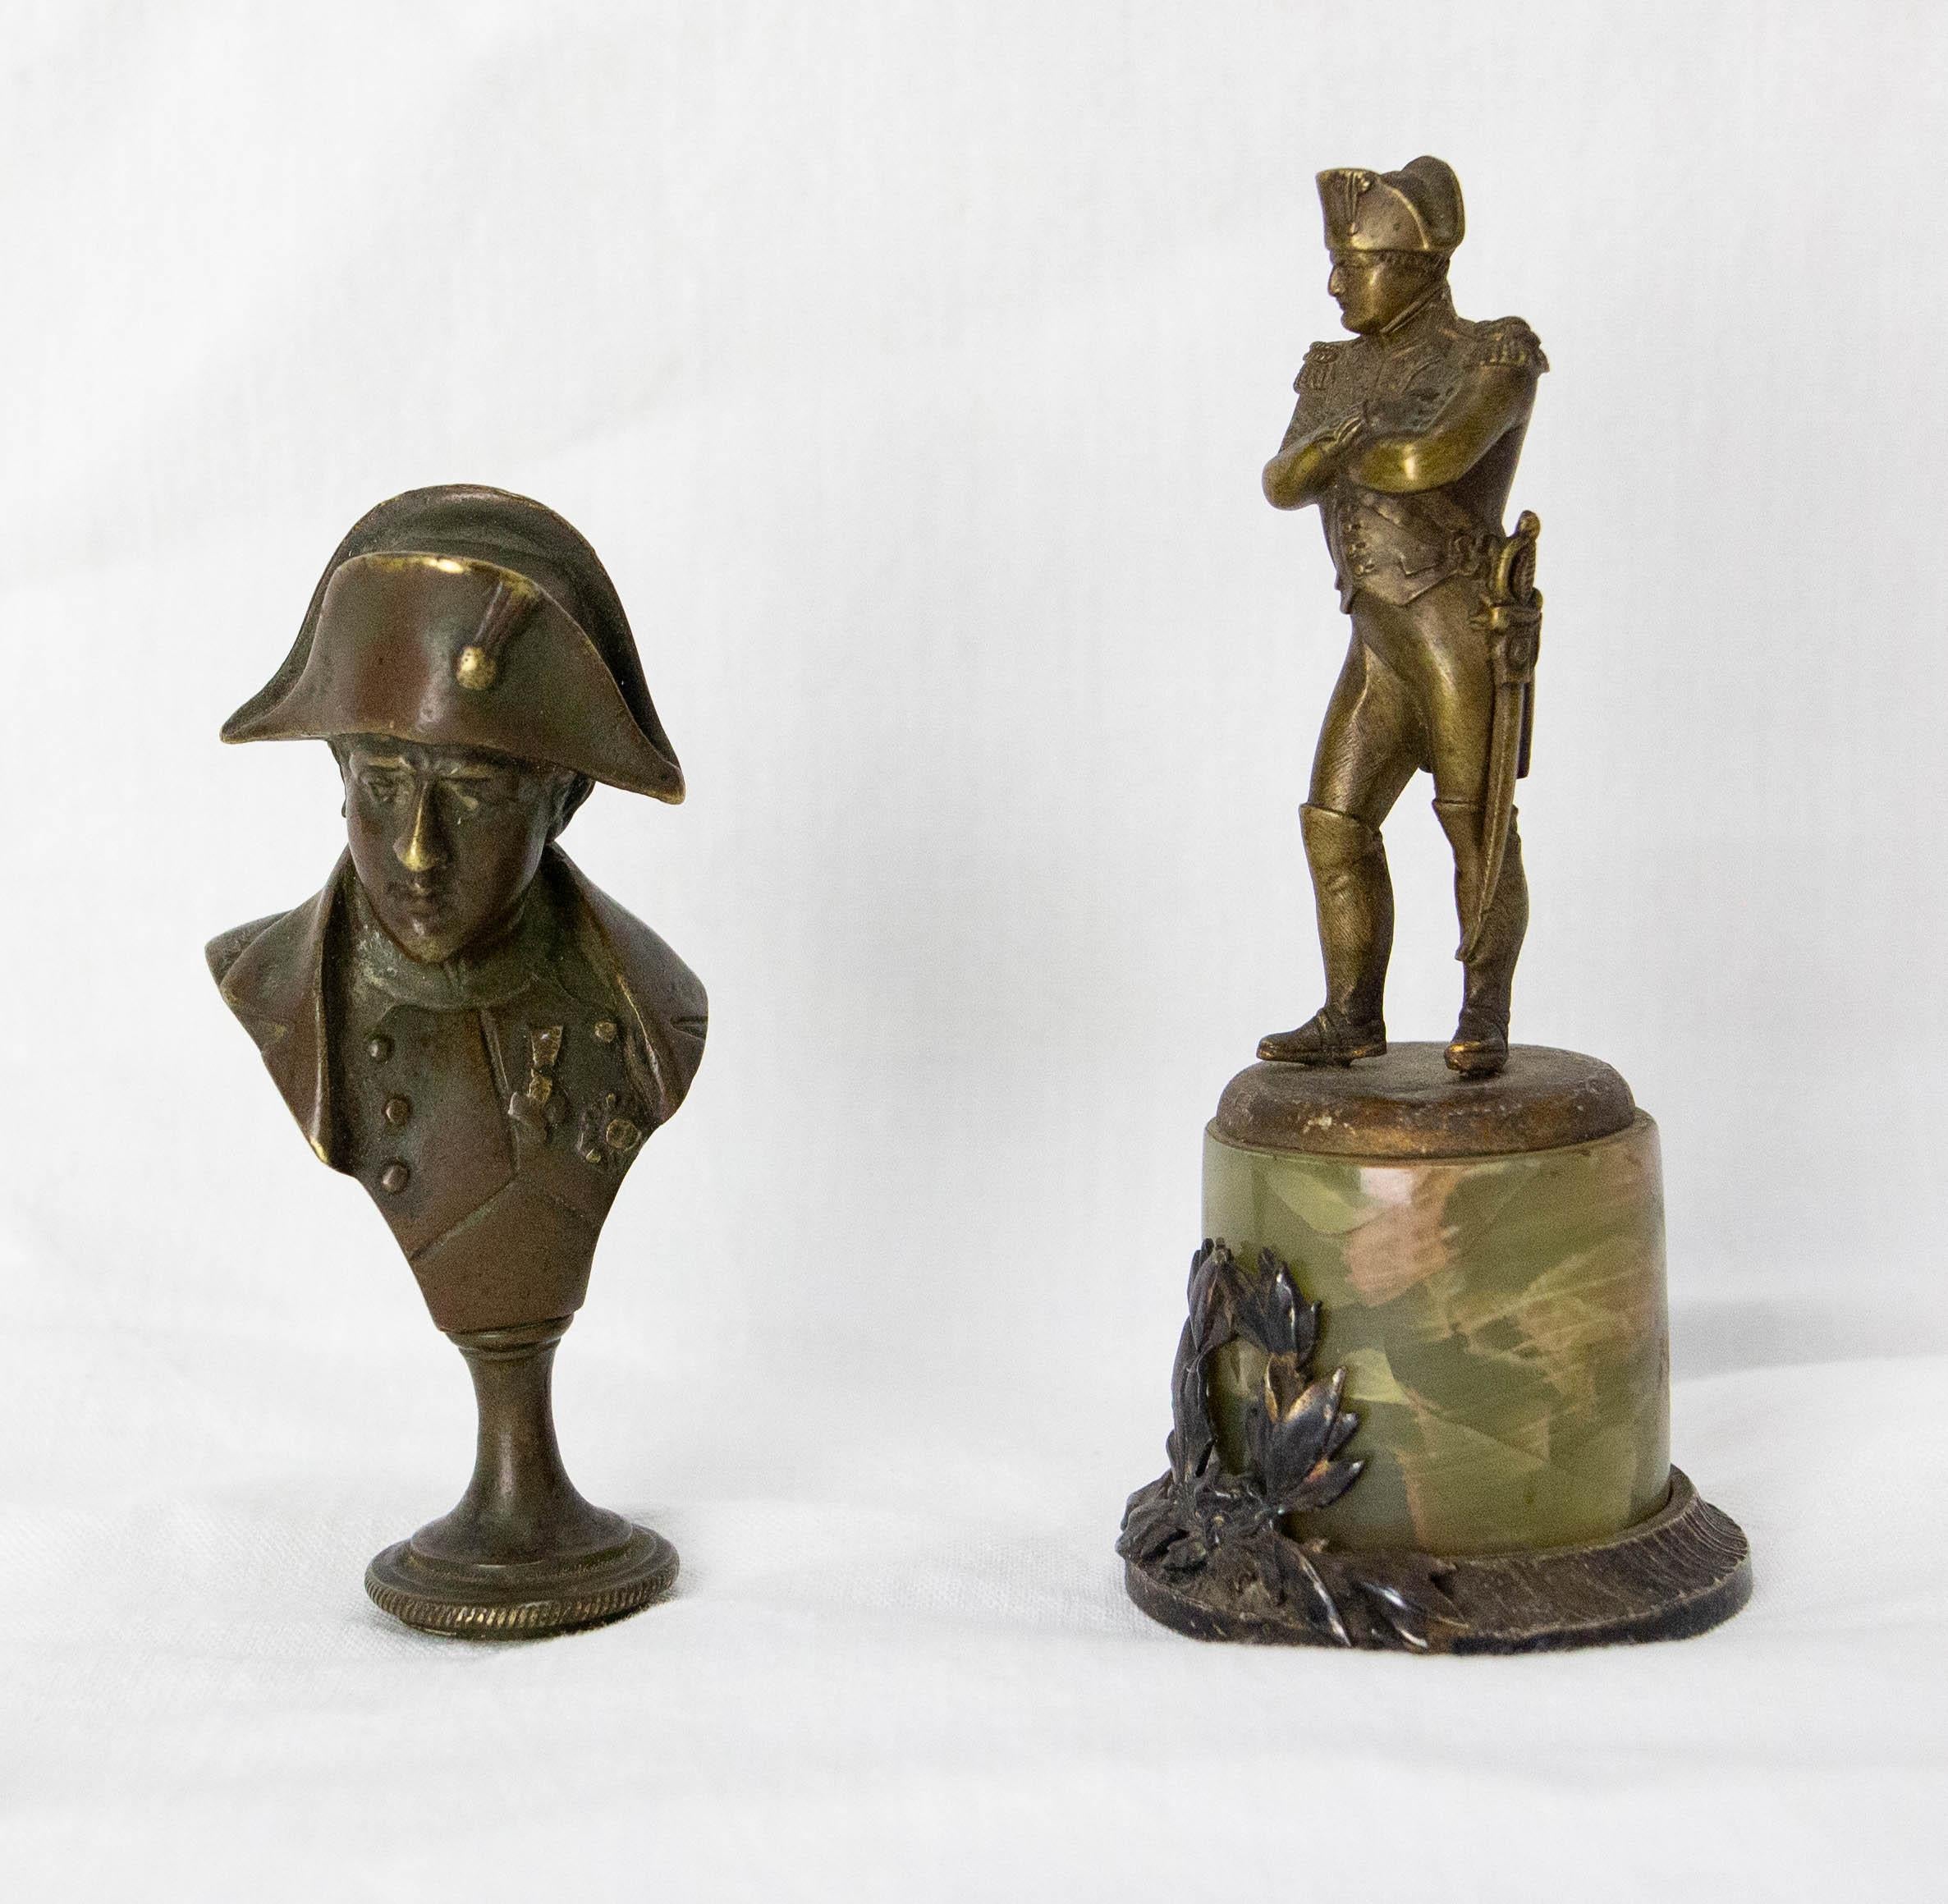 French pair of statuettes representing Napoléon the First.
The stading statuette represents Napoleon on a green marble pedestal and the other with Napoleon's bust is the upper part of a seal.
Dimension:
Napoléon on pedestal: Diameter 1.97 in. Height